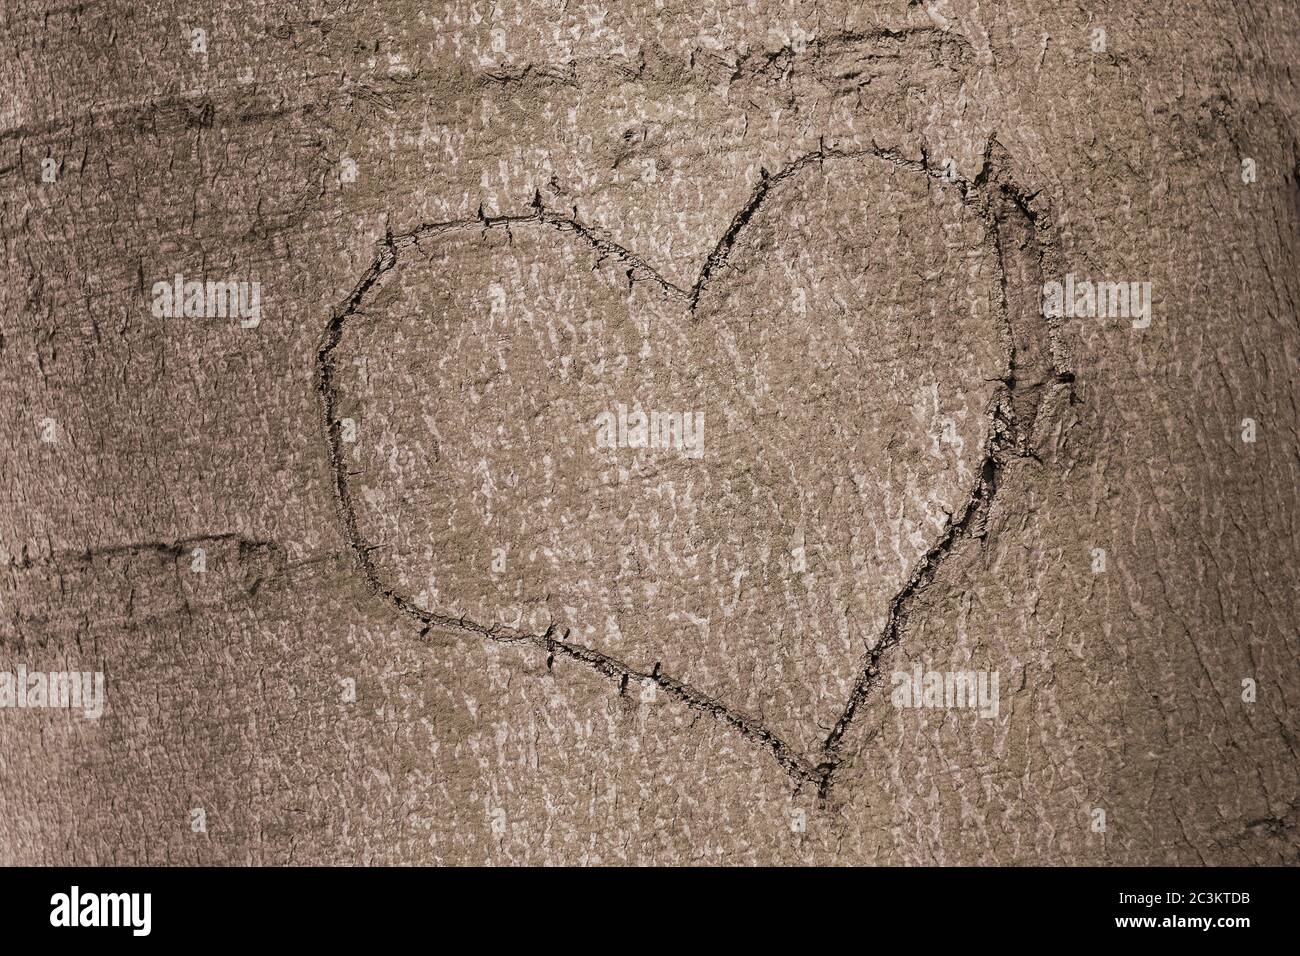 Closeup shot of a heart carved on the trunk of a tree - good for a background Stock Photo